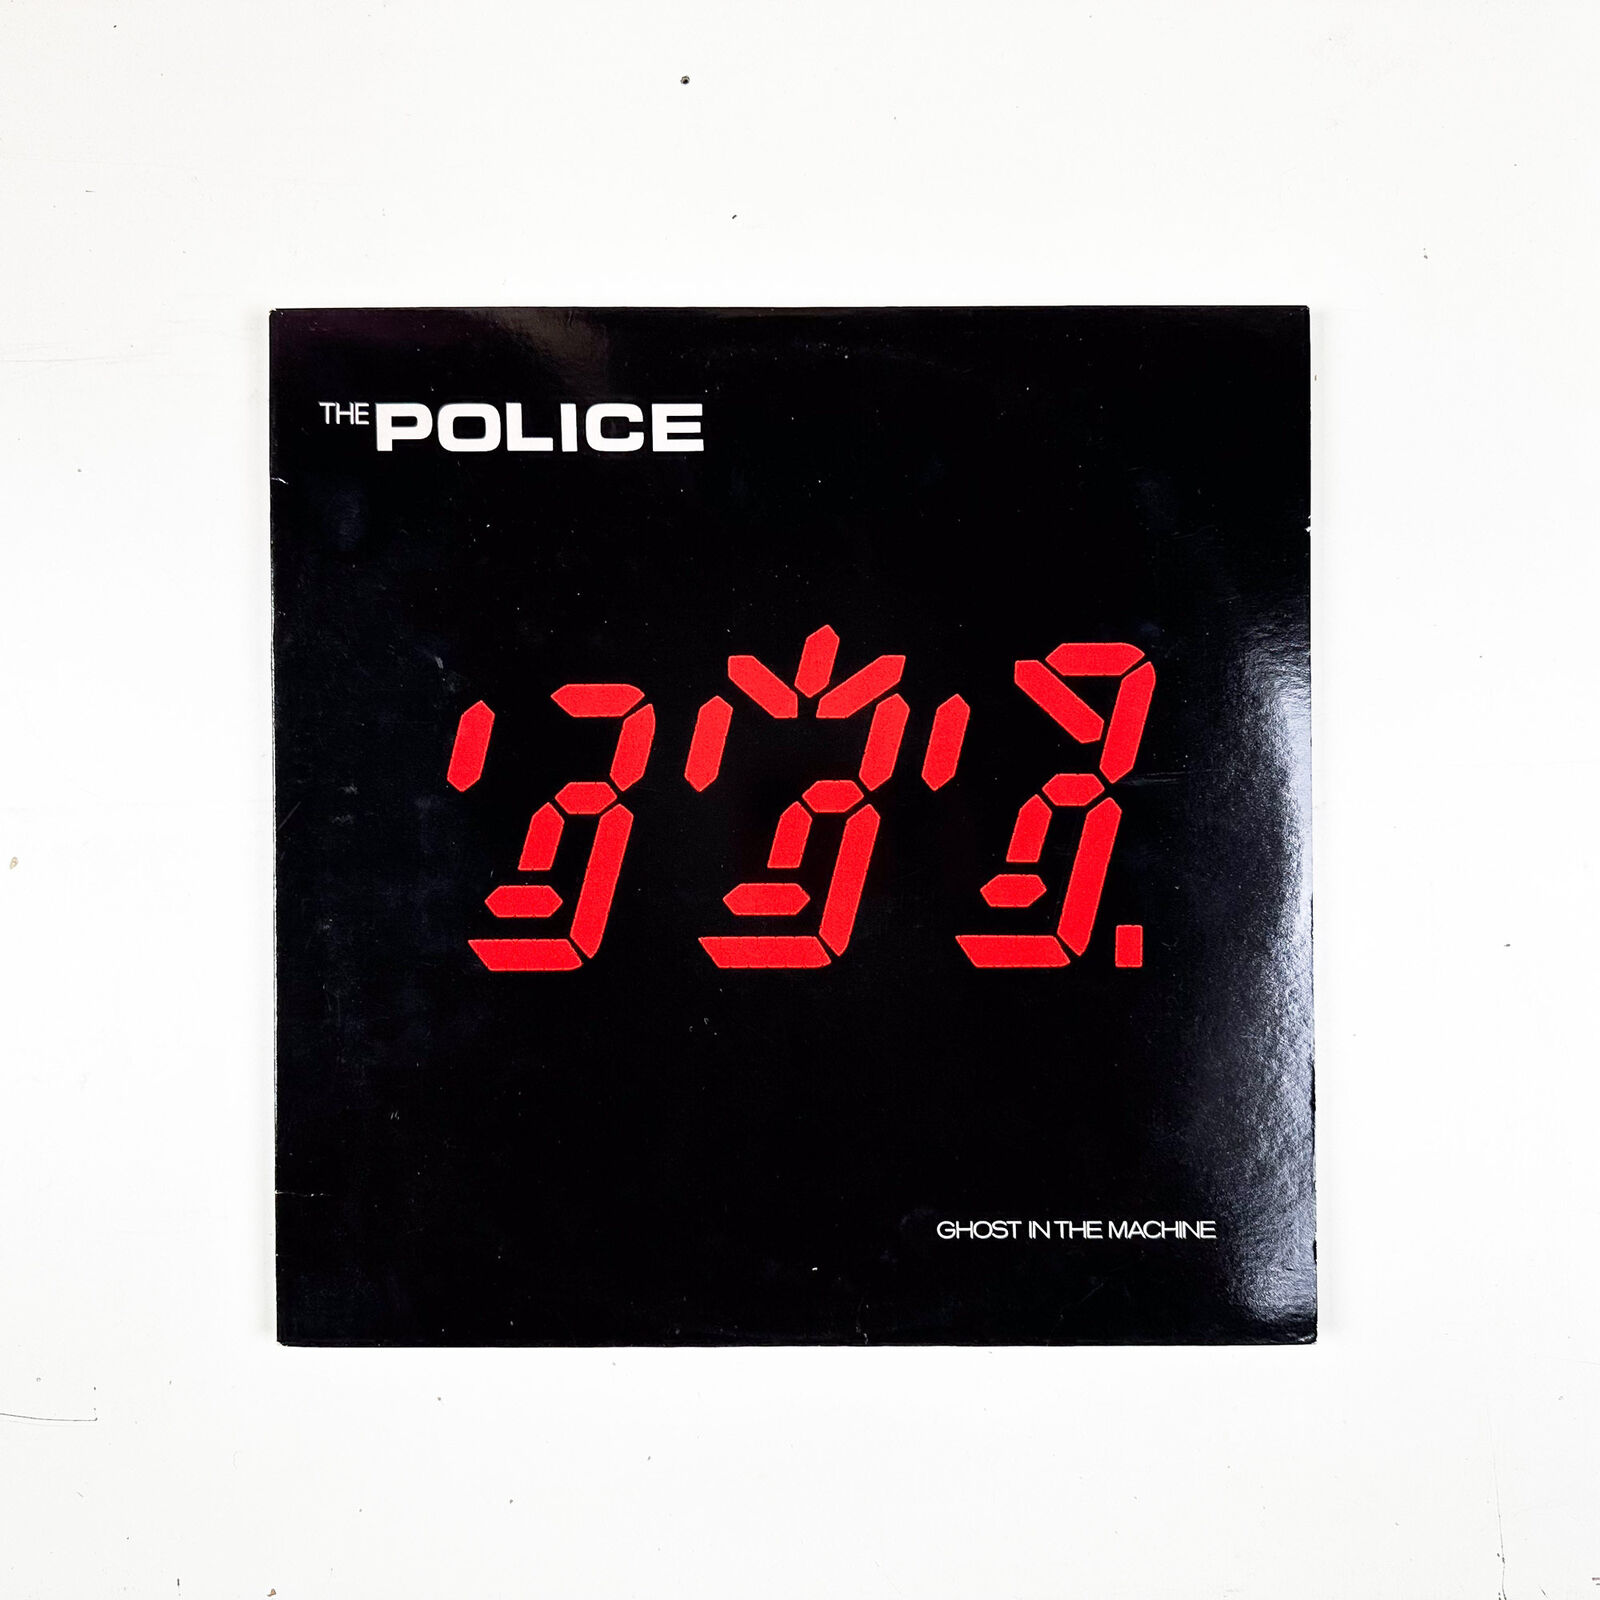 The Police - Ghost In The Machine - Vinyl LP Record - 1981